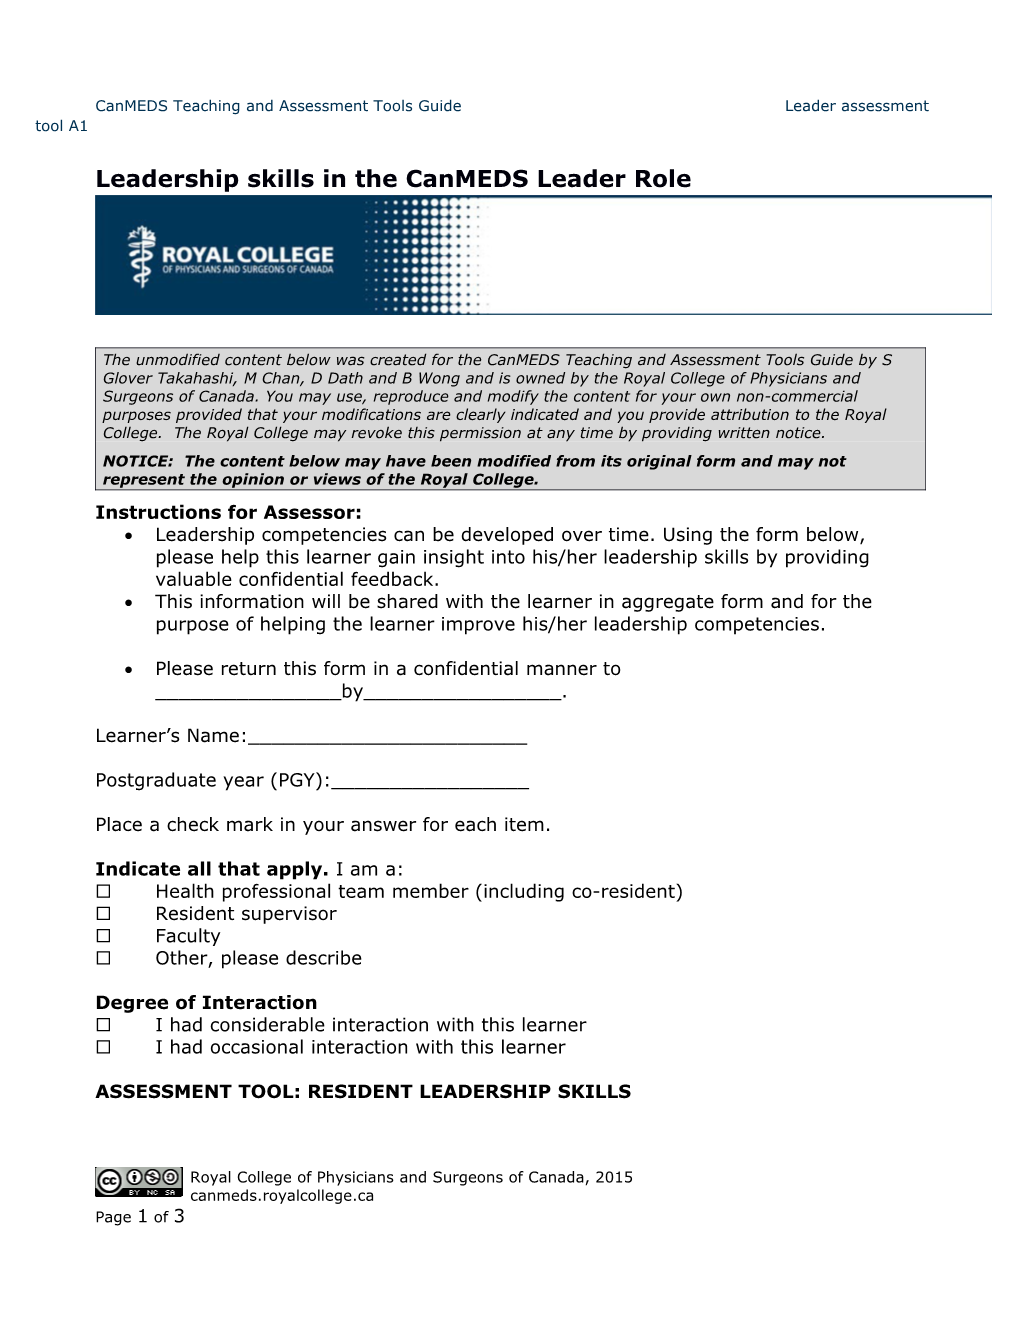 Leadership Skills in the Canmeds Leader Role